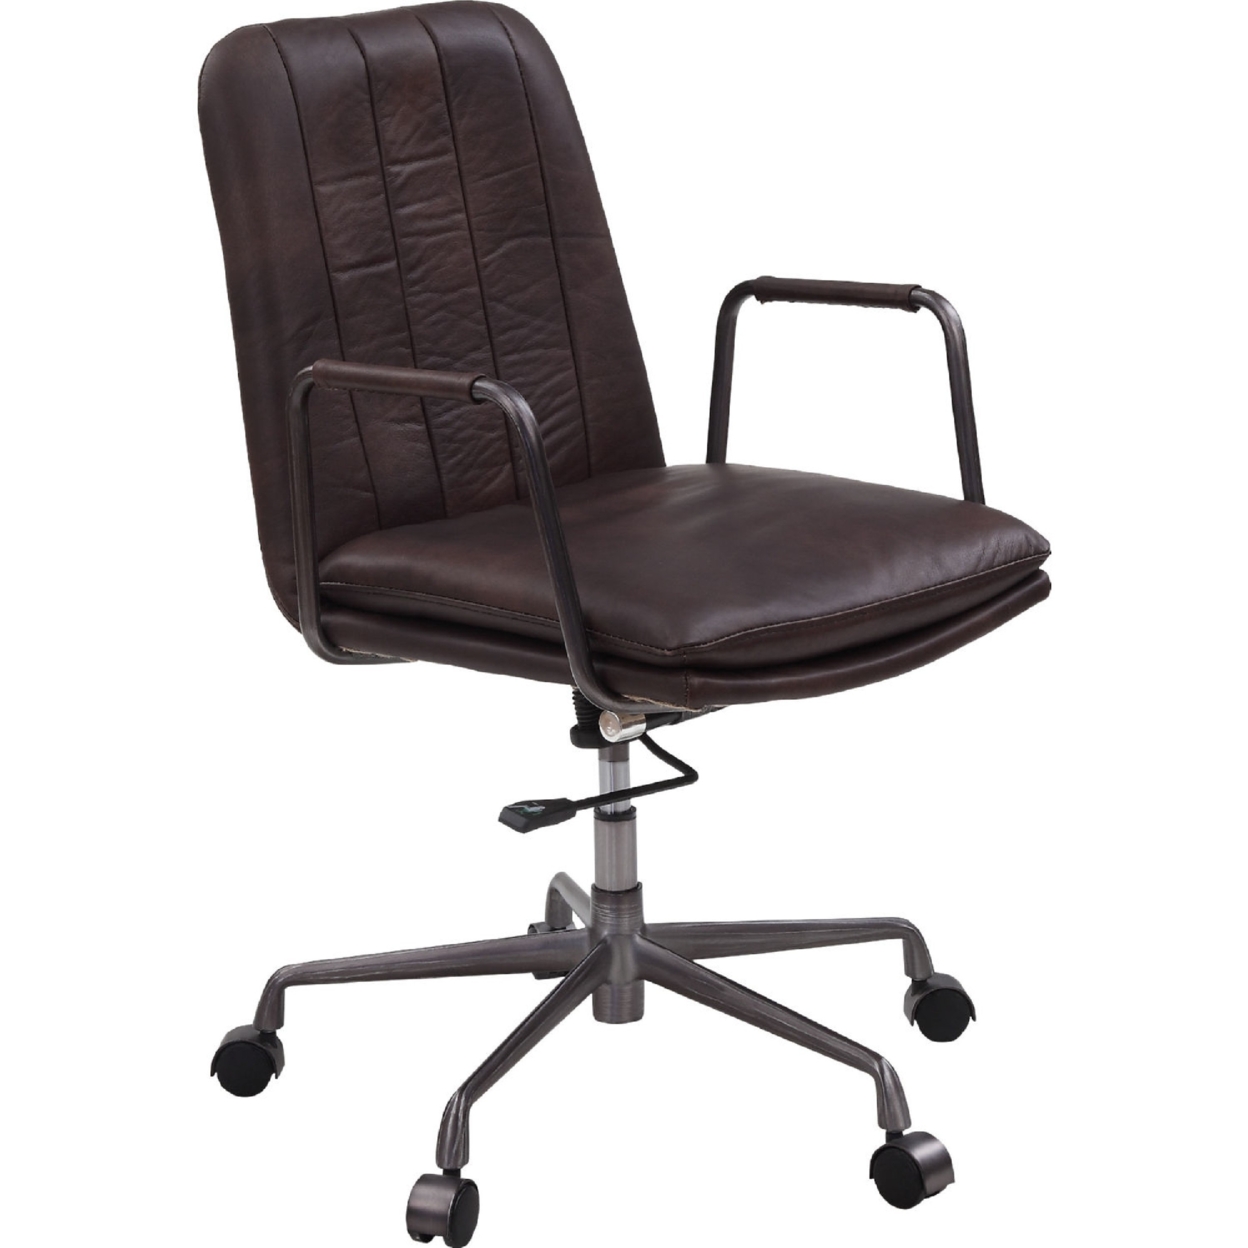 Office Chair With Leather Seat And Channel Stitching, Dark Brown- Saltoro Sherpi